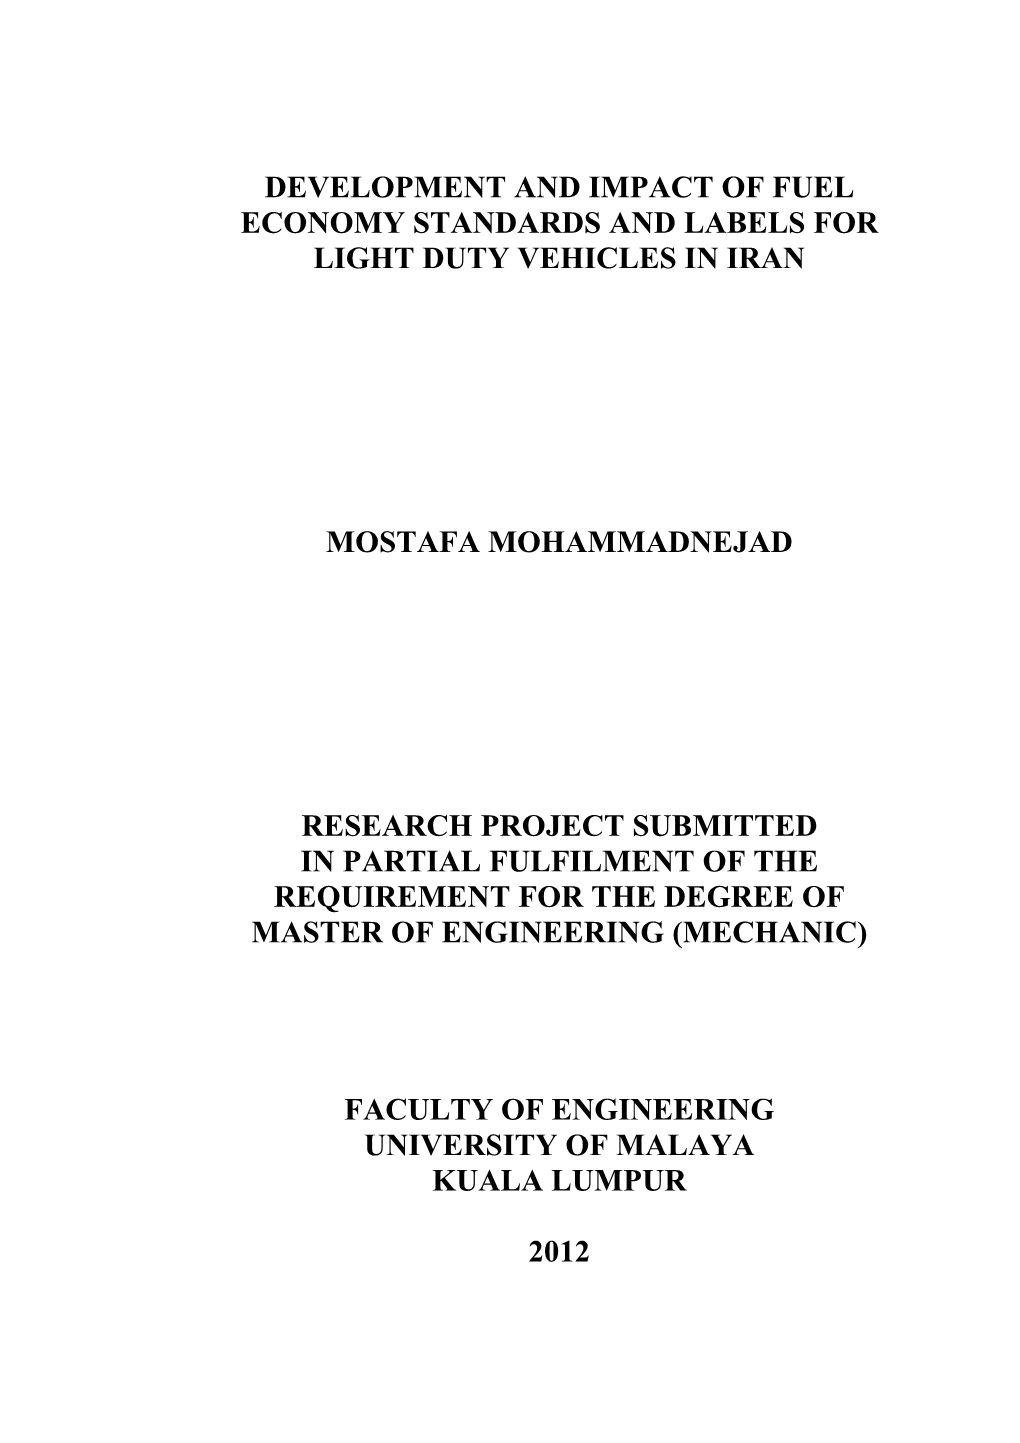 Development and Impact of Fuel Economy Standards and Labels for Light Duty Vehicles in Iran